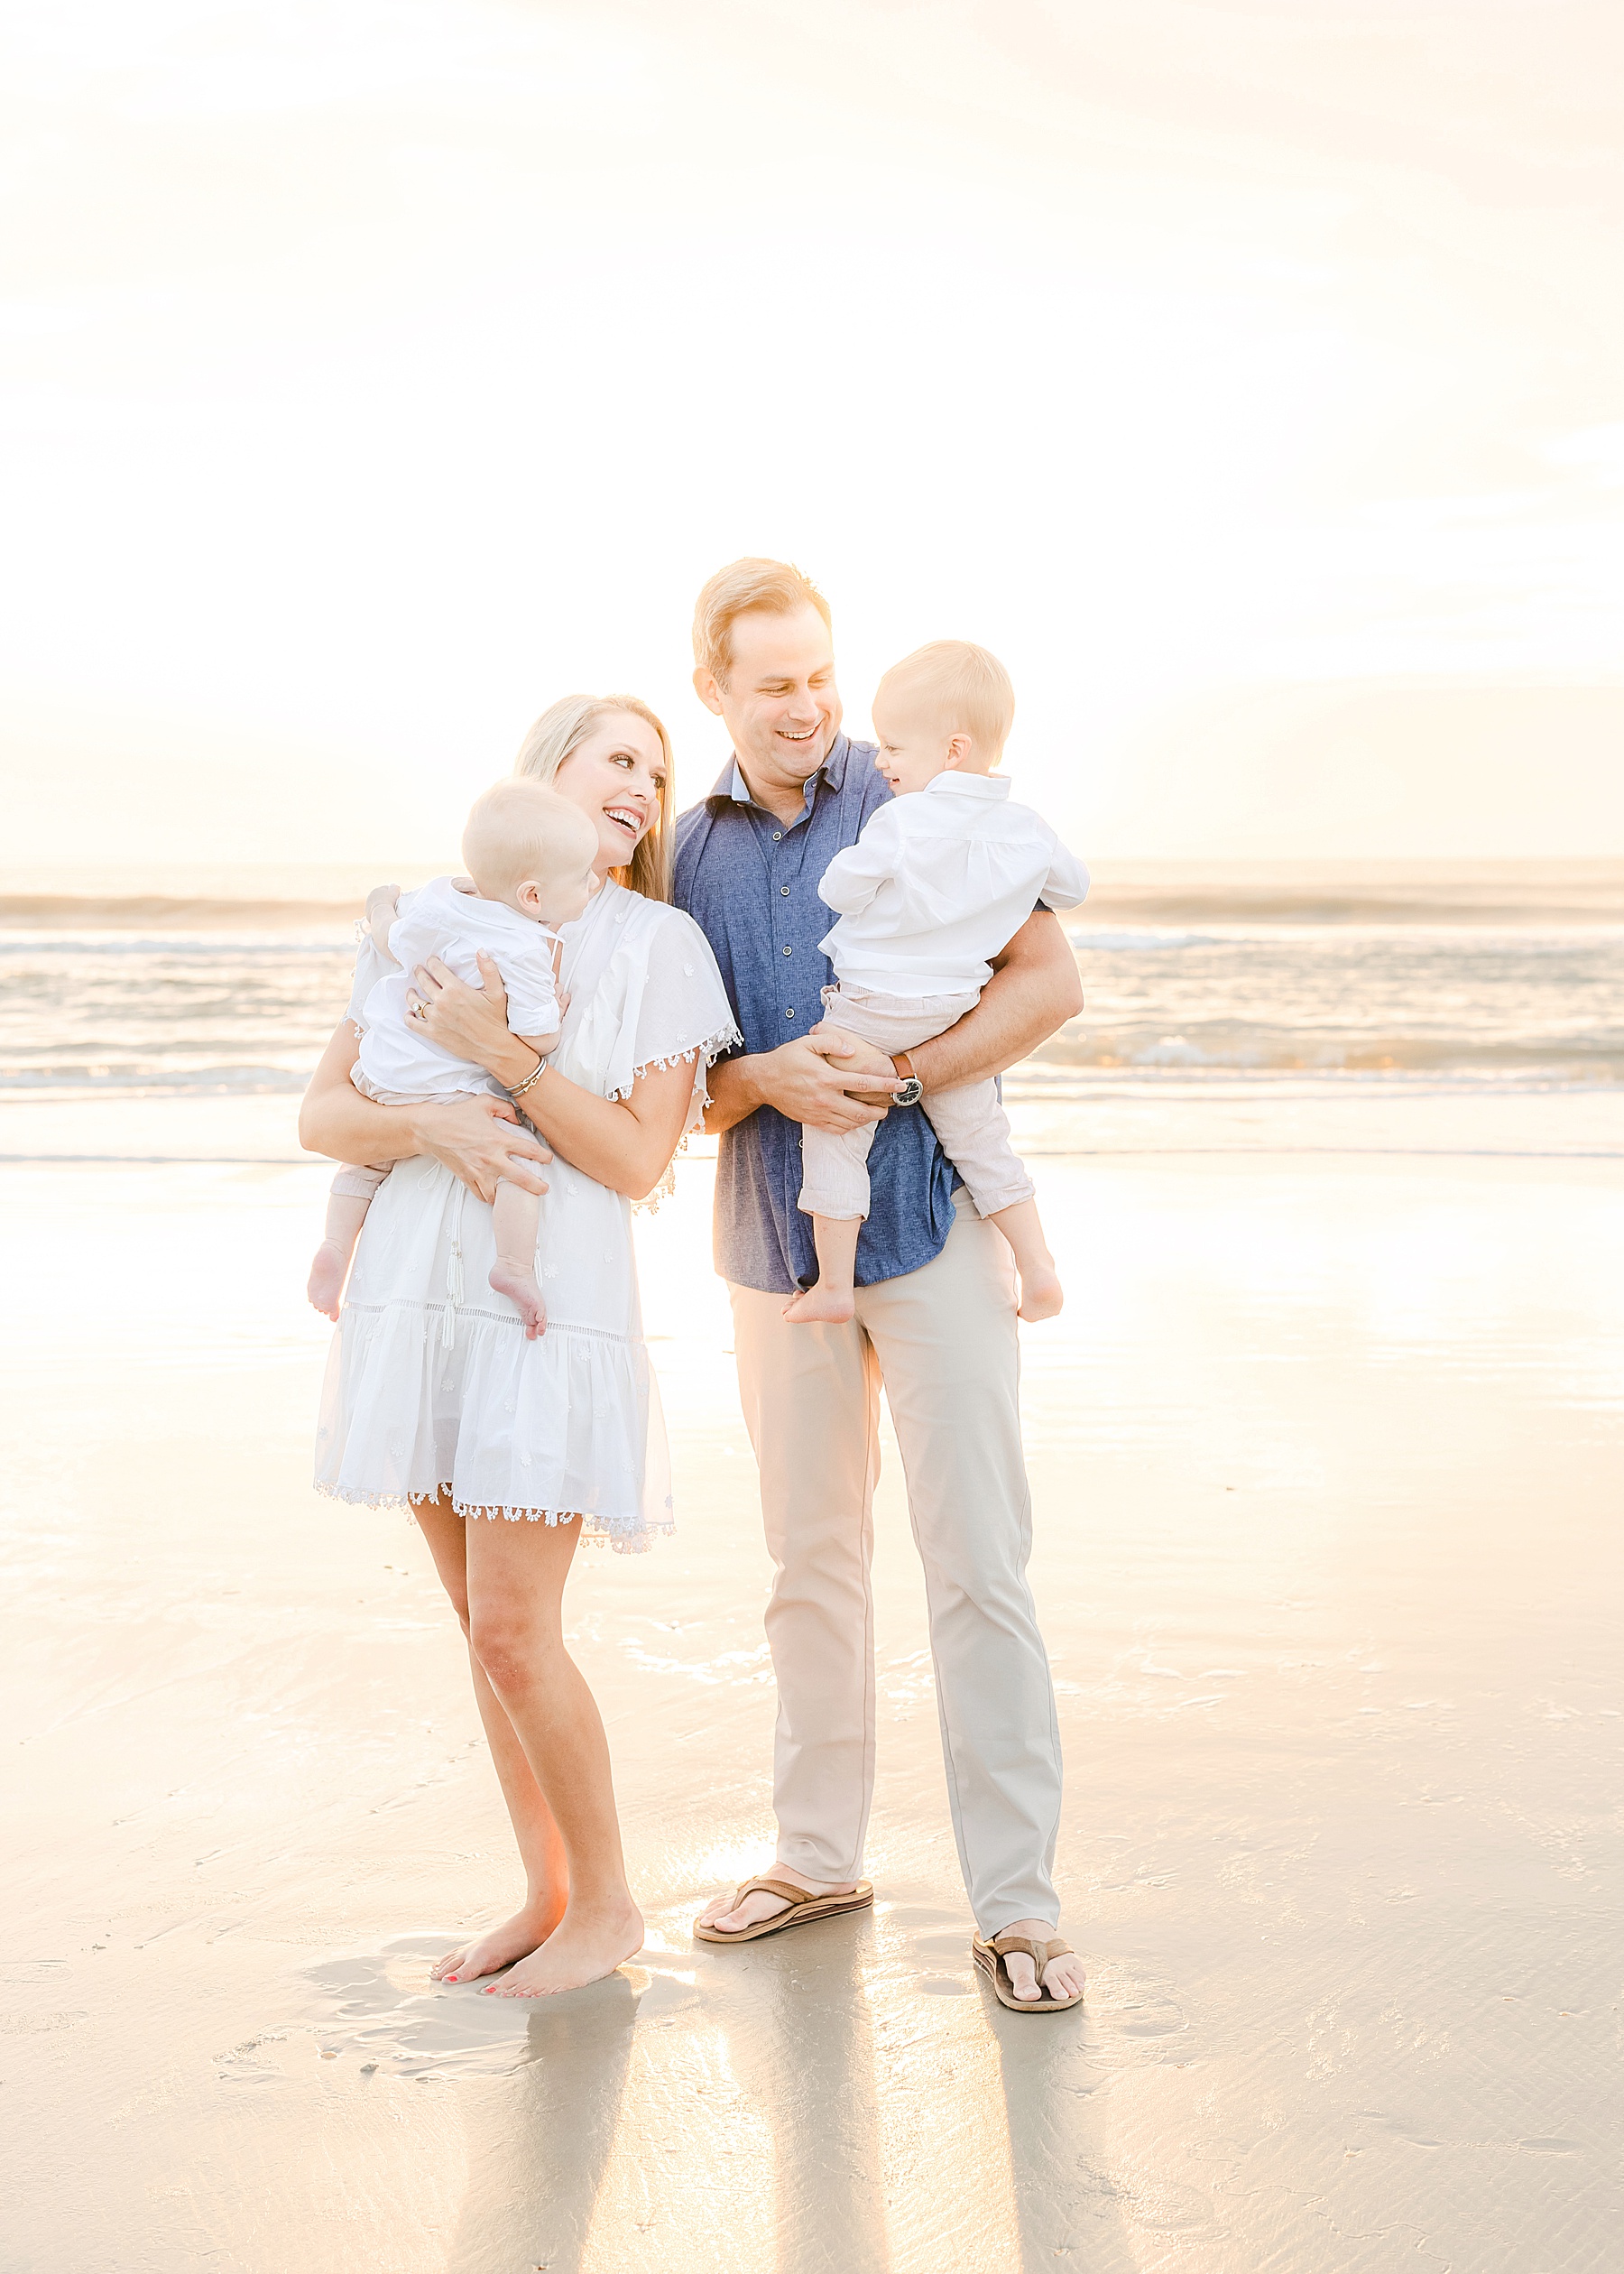 family of four standing on the beach at sunrise in st. augustine florida light and airy clothing